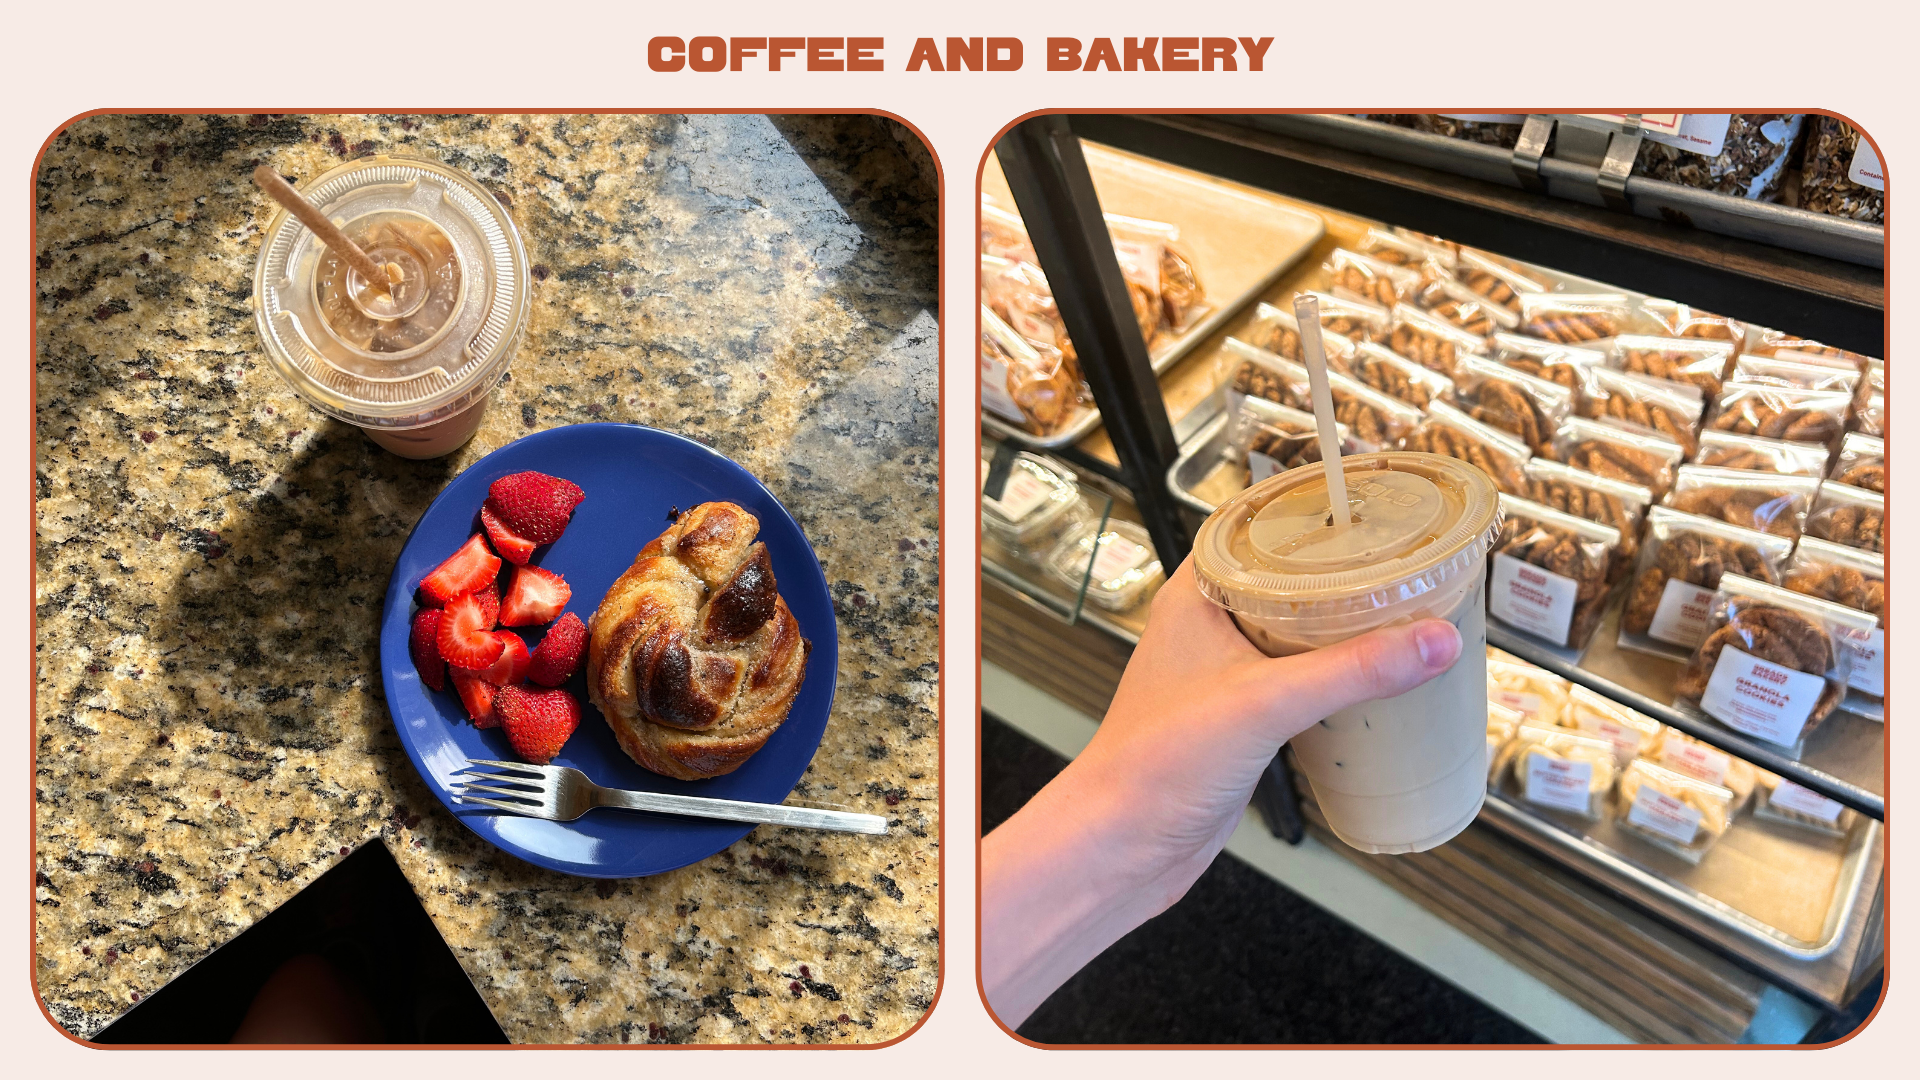 L: iced latte and cardamom bun from Smør (Smor) Bakery; R: iced latte and baked goods from Breads Bakery 